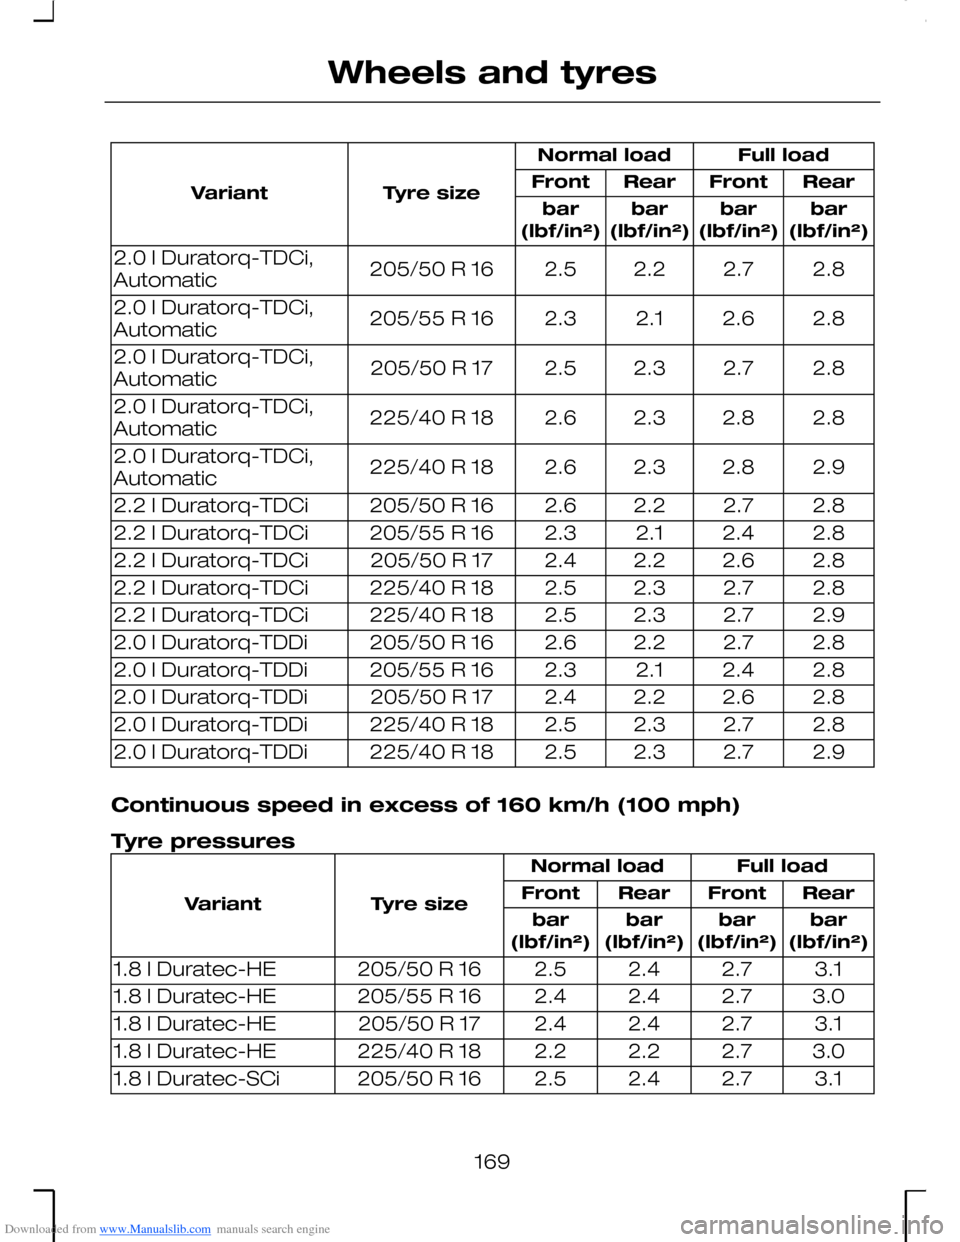 FORD MONDEO 2006 2.G Owners Manual Downloaded from www.Manualslib.com manuals search engine Full loadNormal load
Tyre sizeVariantRearFrontRearFront
bar(lbf/in²)bar(lbf/in²)bar(lbf/in²)bar(lbf/in²)
2.82.72.22.5205/50 R 162.0 l Durat